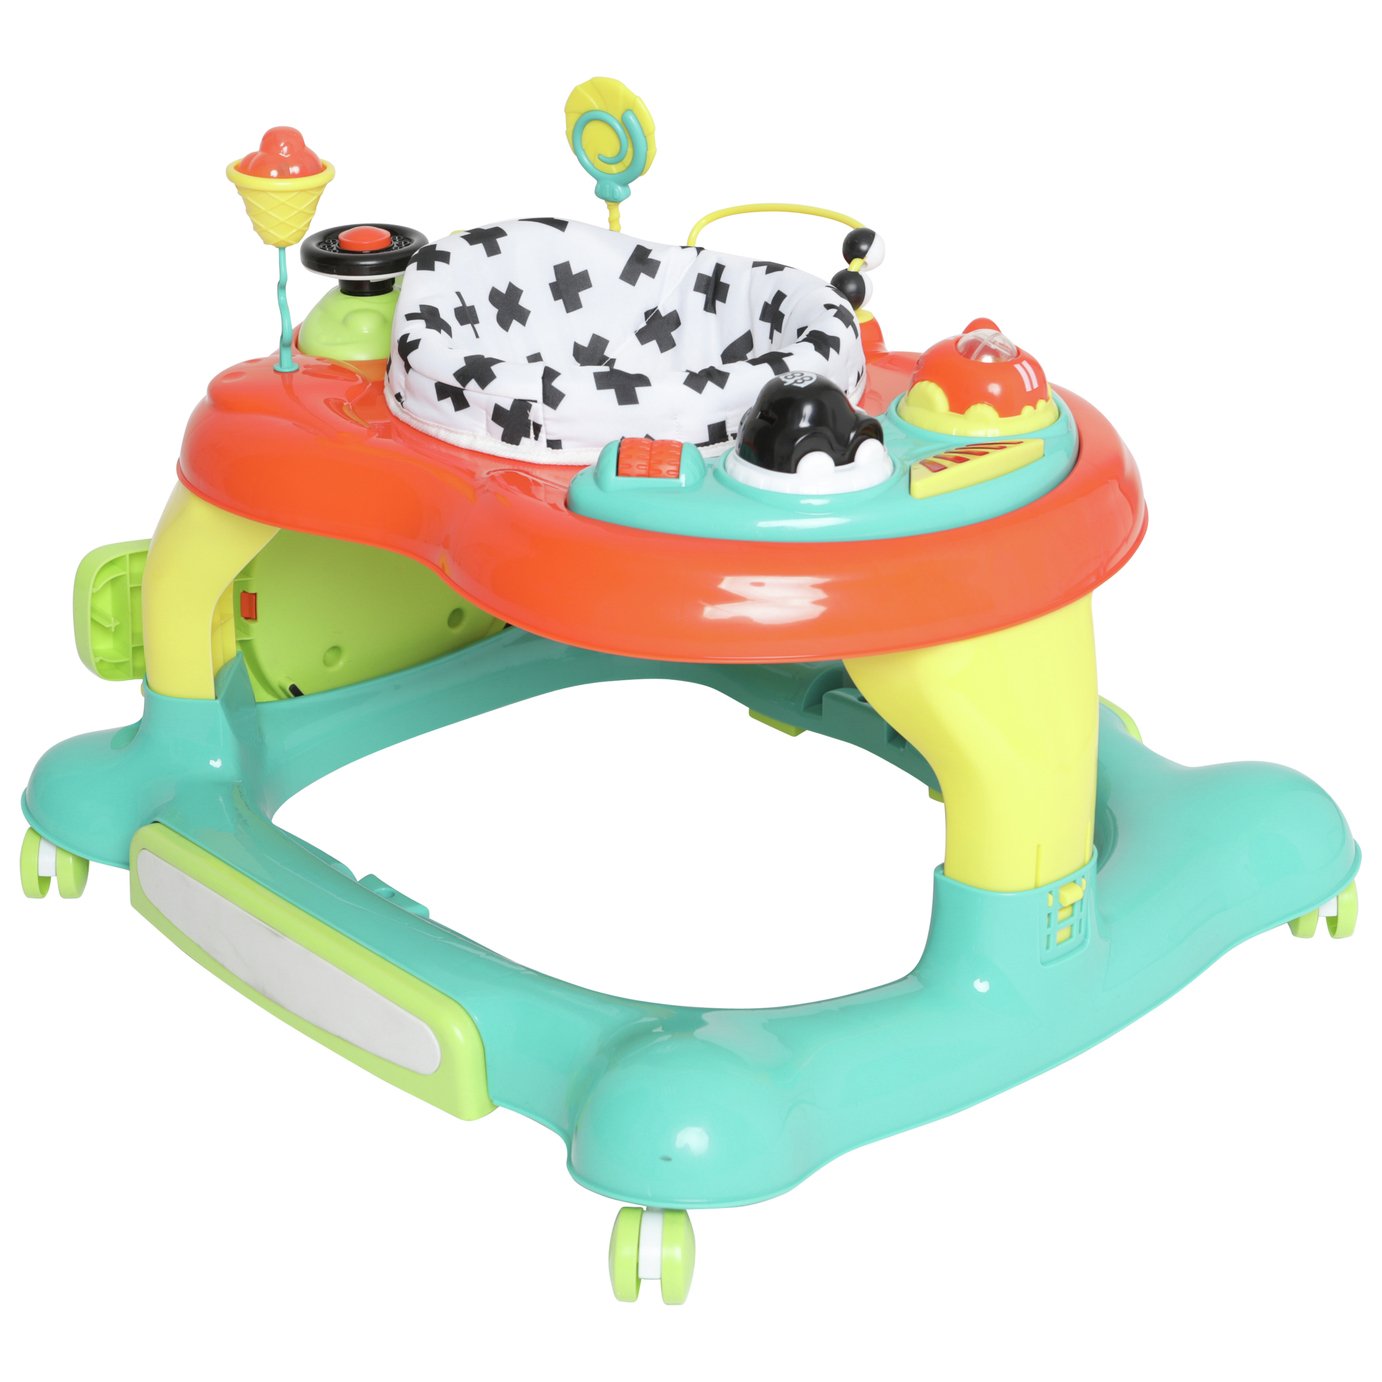 MyChild Roundabout 4 in 1 Activity Walker Review